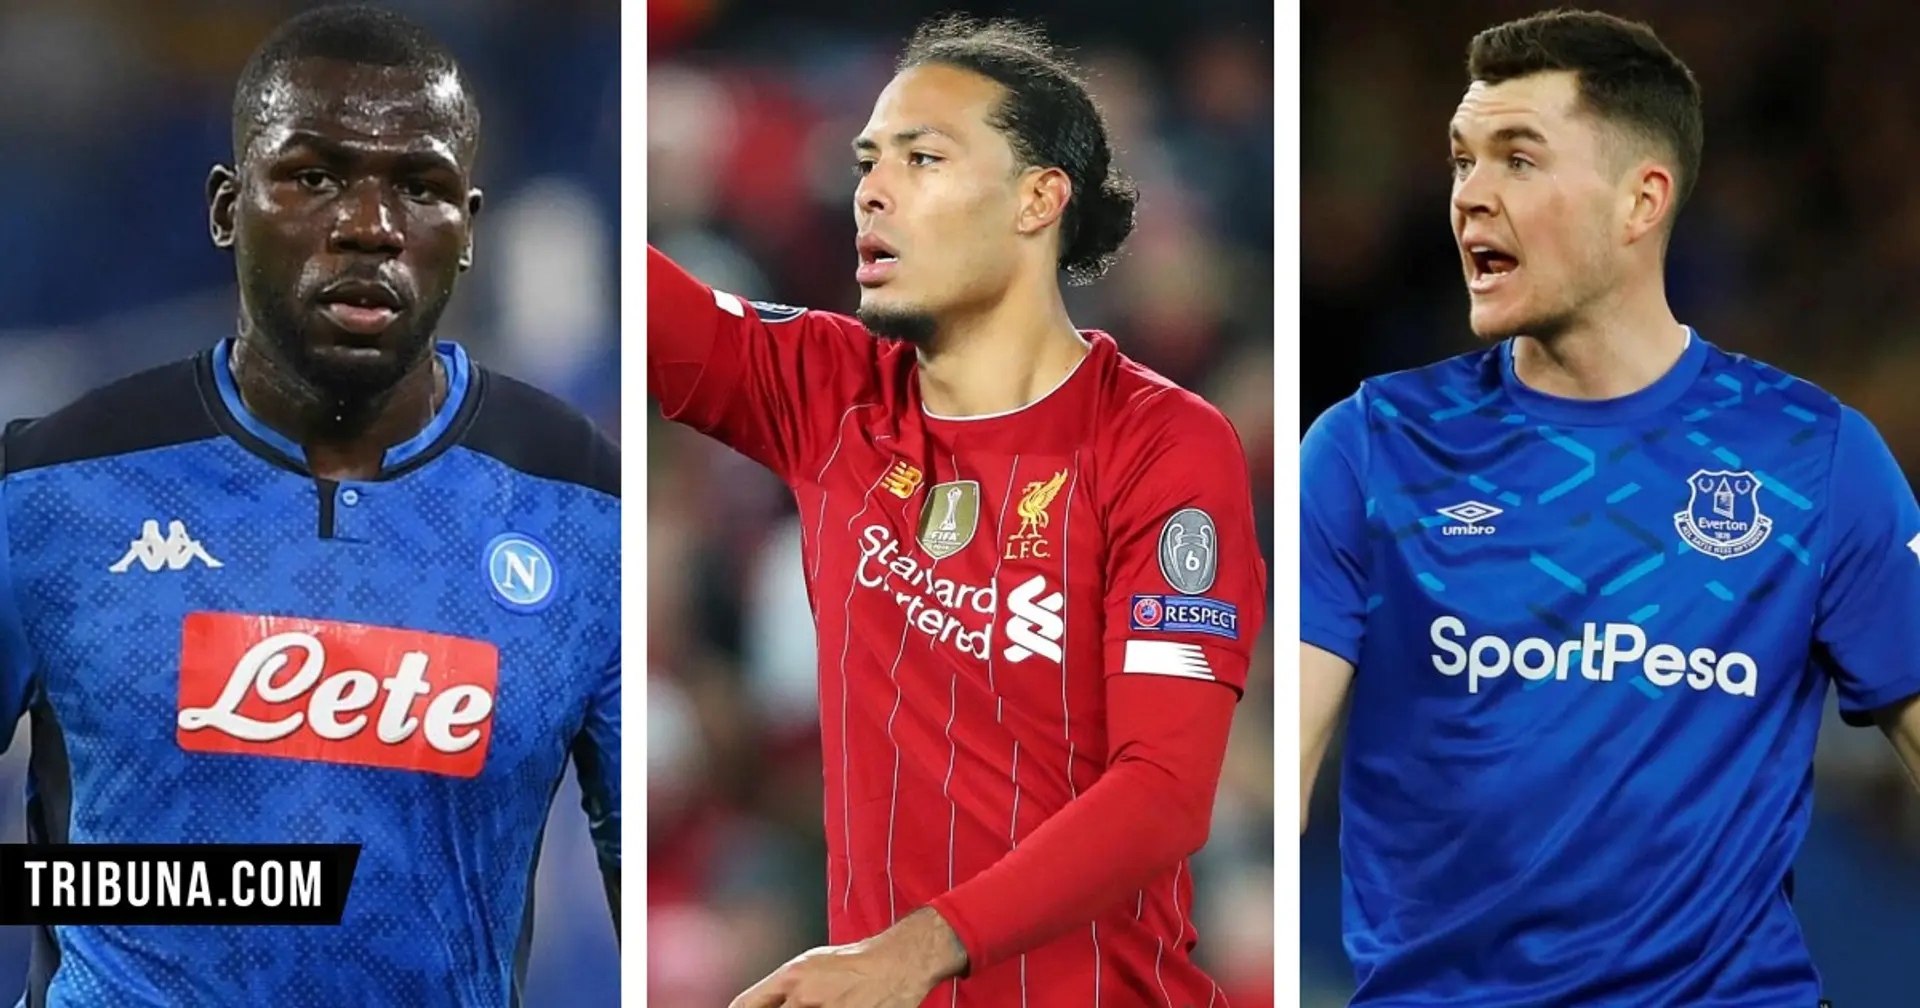 8 alternatives were named to Van Dijk in 2017 – Here's what happened to them